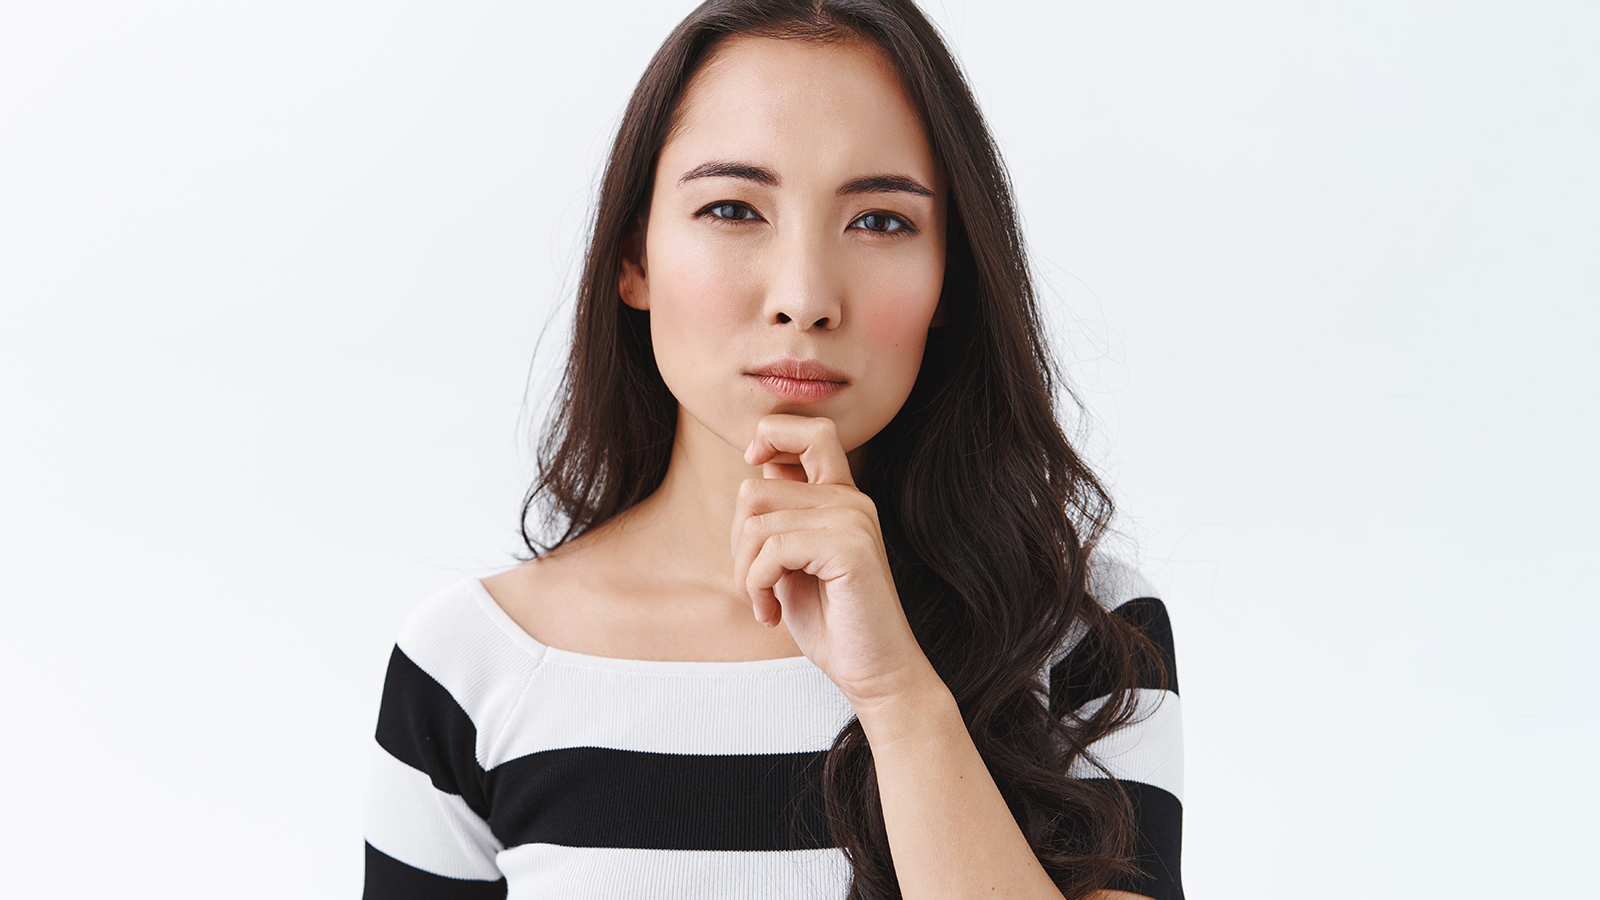 Judgemental serious-looking skeptical asian woman having doubts, staring pensive, touch chin thoughtful frowning and squinting as weighing up choices, thinking over white background